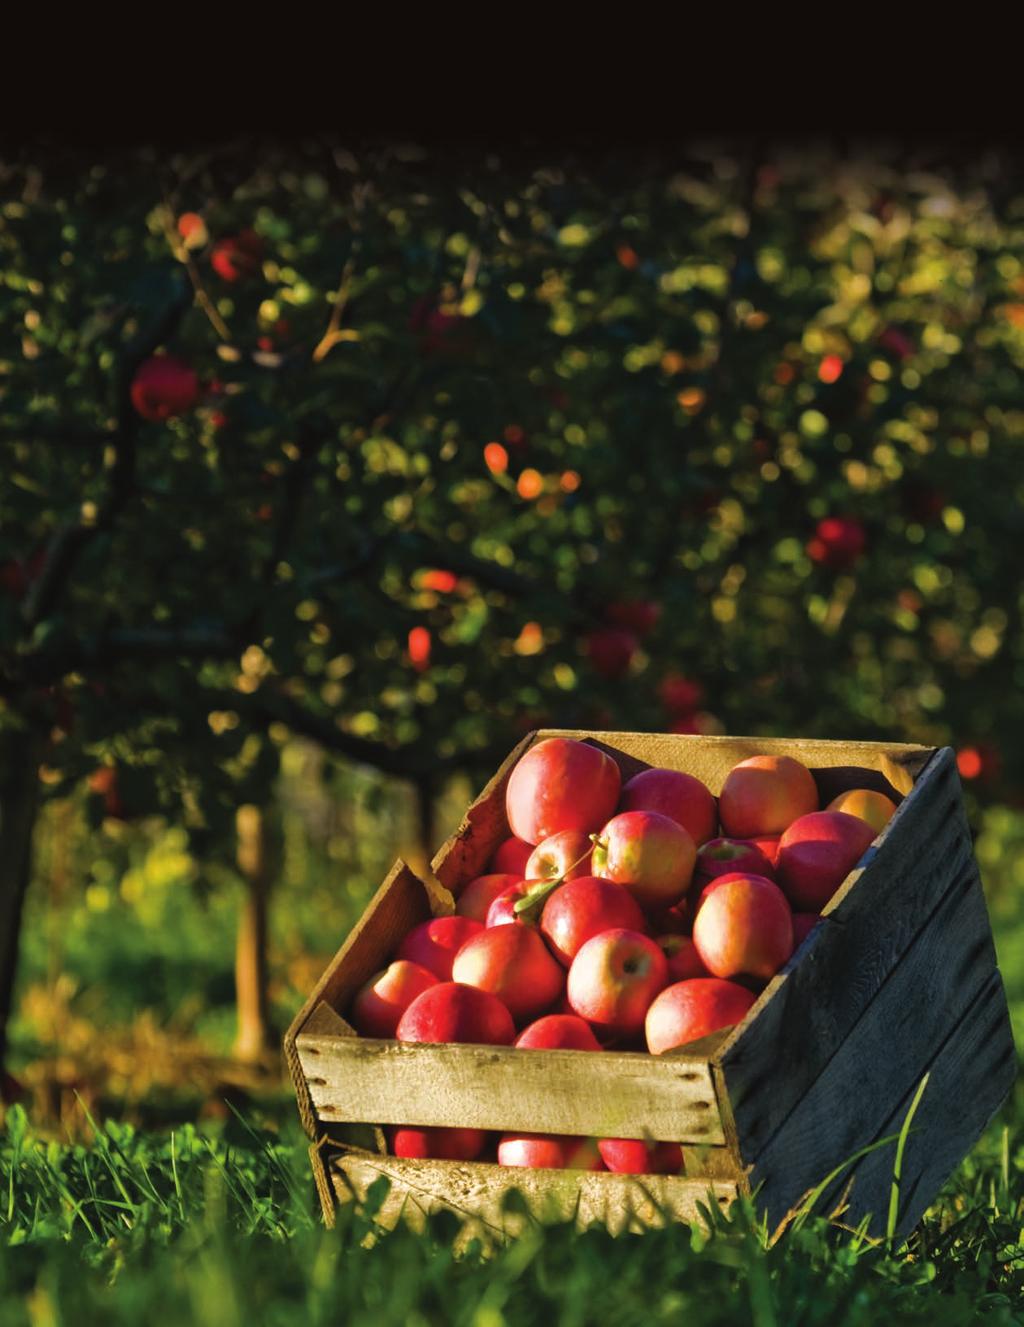 ElegantLiving Autumn 2011 Complimentary Frederick County at its finest APPLES: Picked